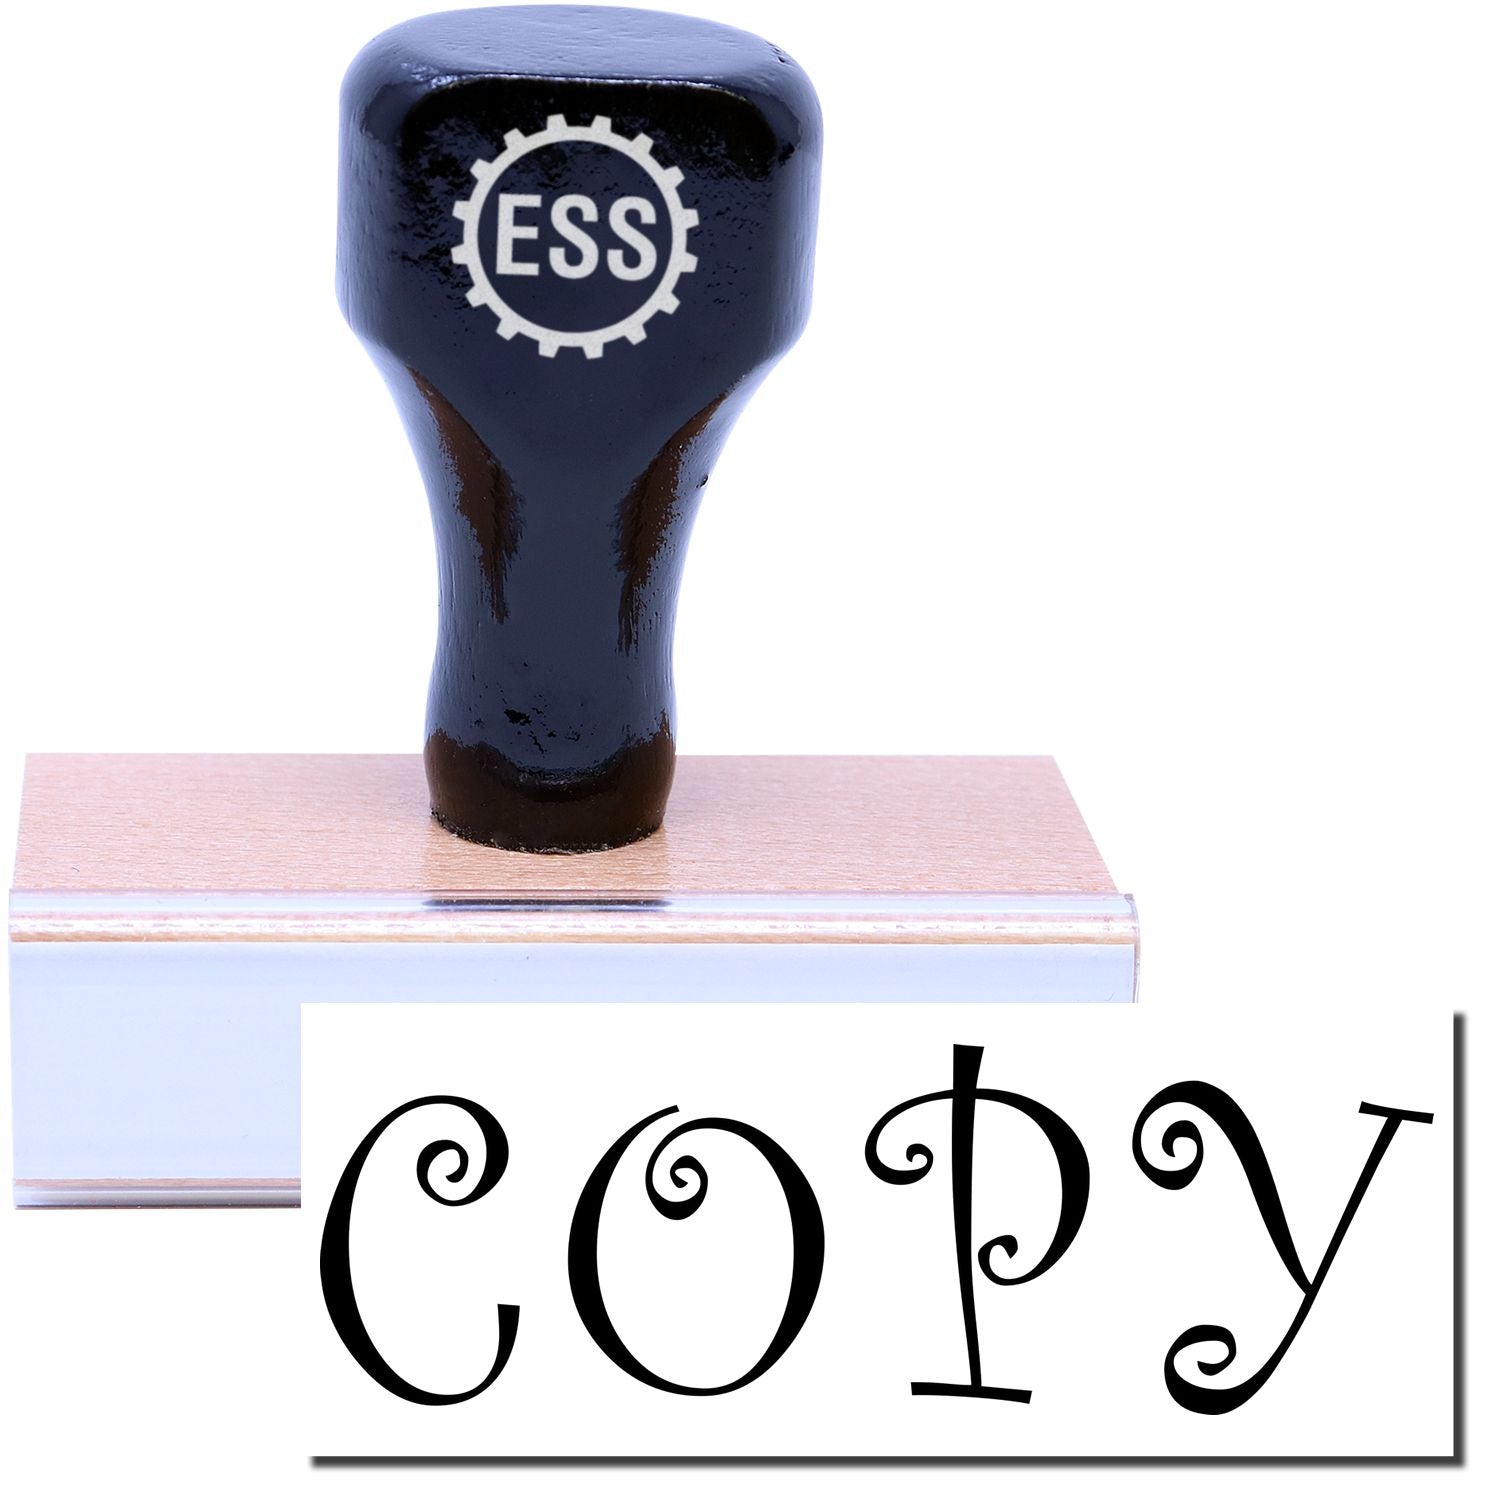 A stock office rubber stamp with a stamped image showing how the text "COPY" in a distinguishing curly font is displayed after stamping.